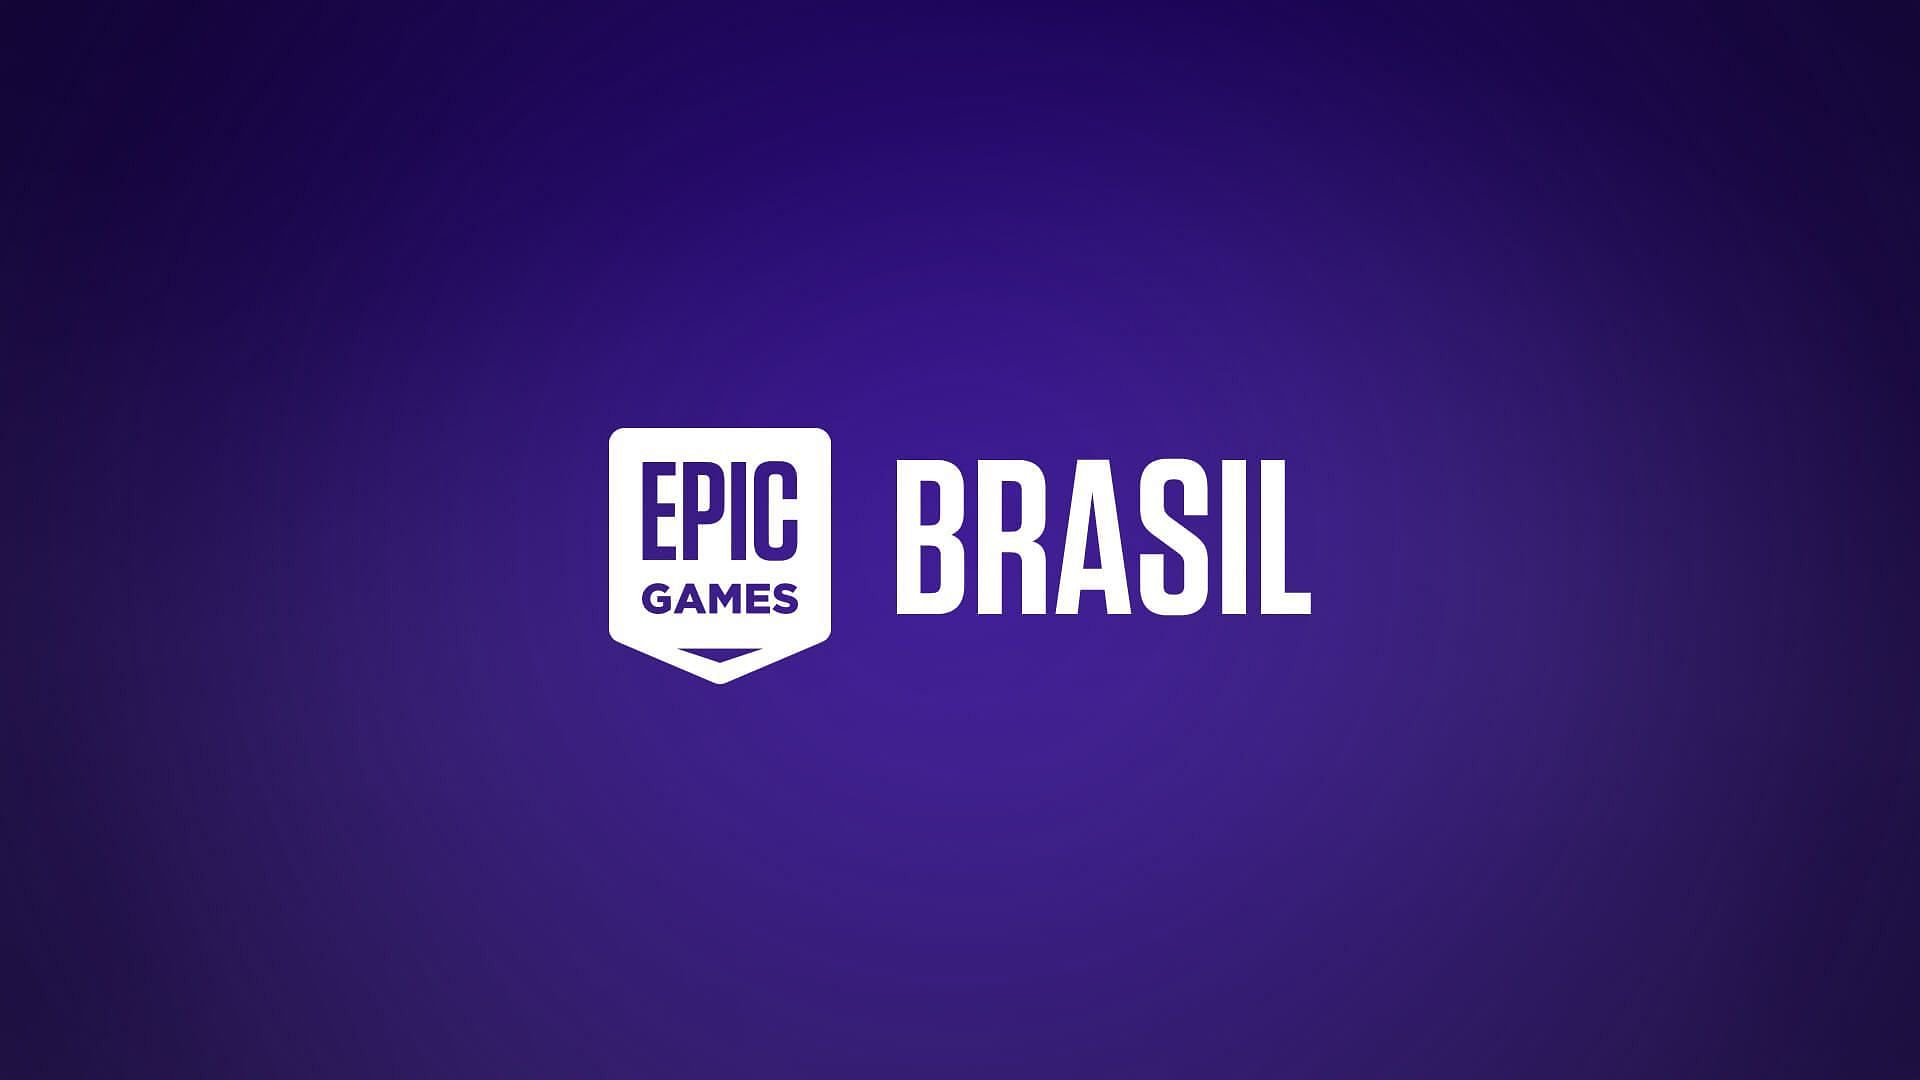 Epic Games Brasil is now formed (Image via Epic Games Store)